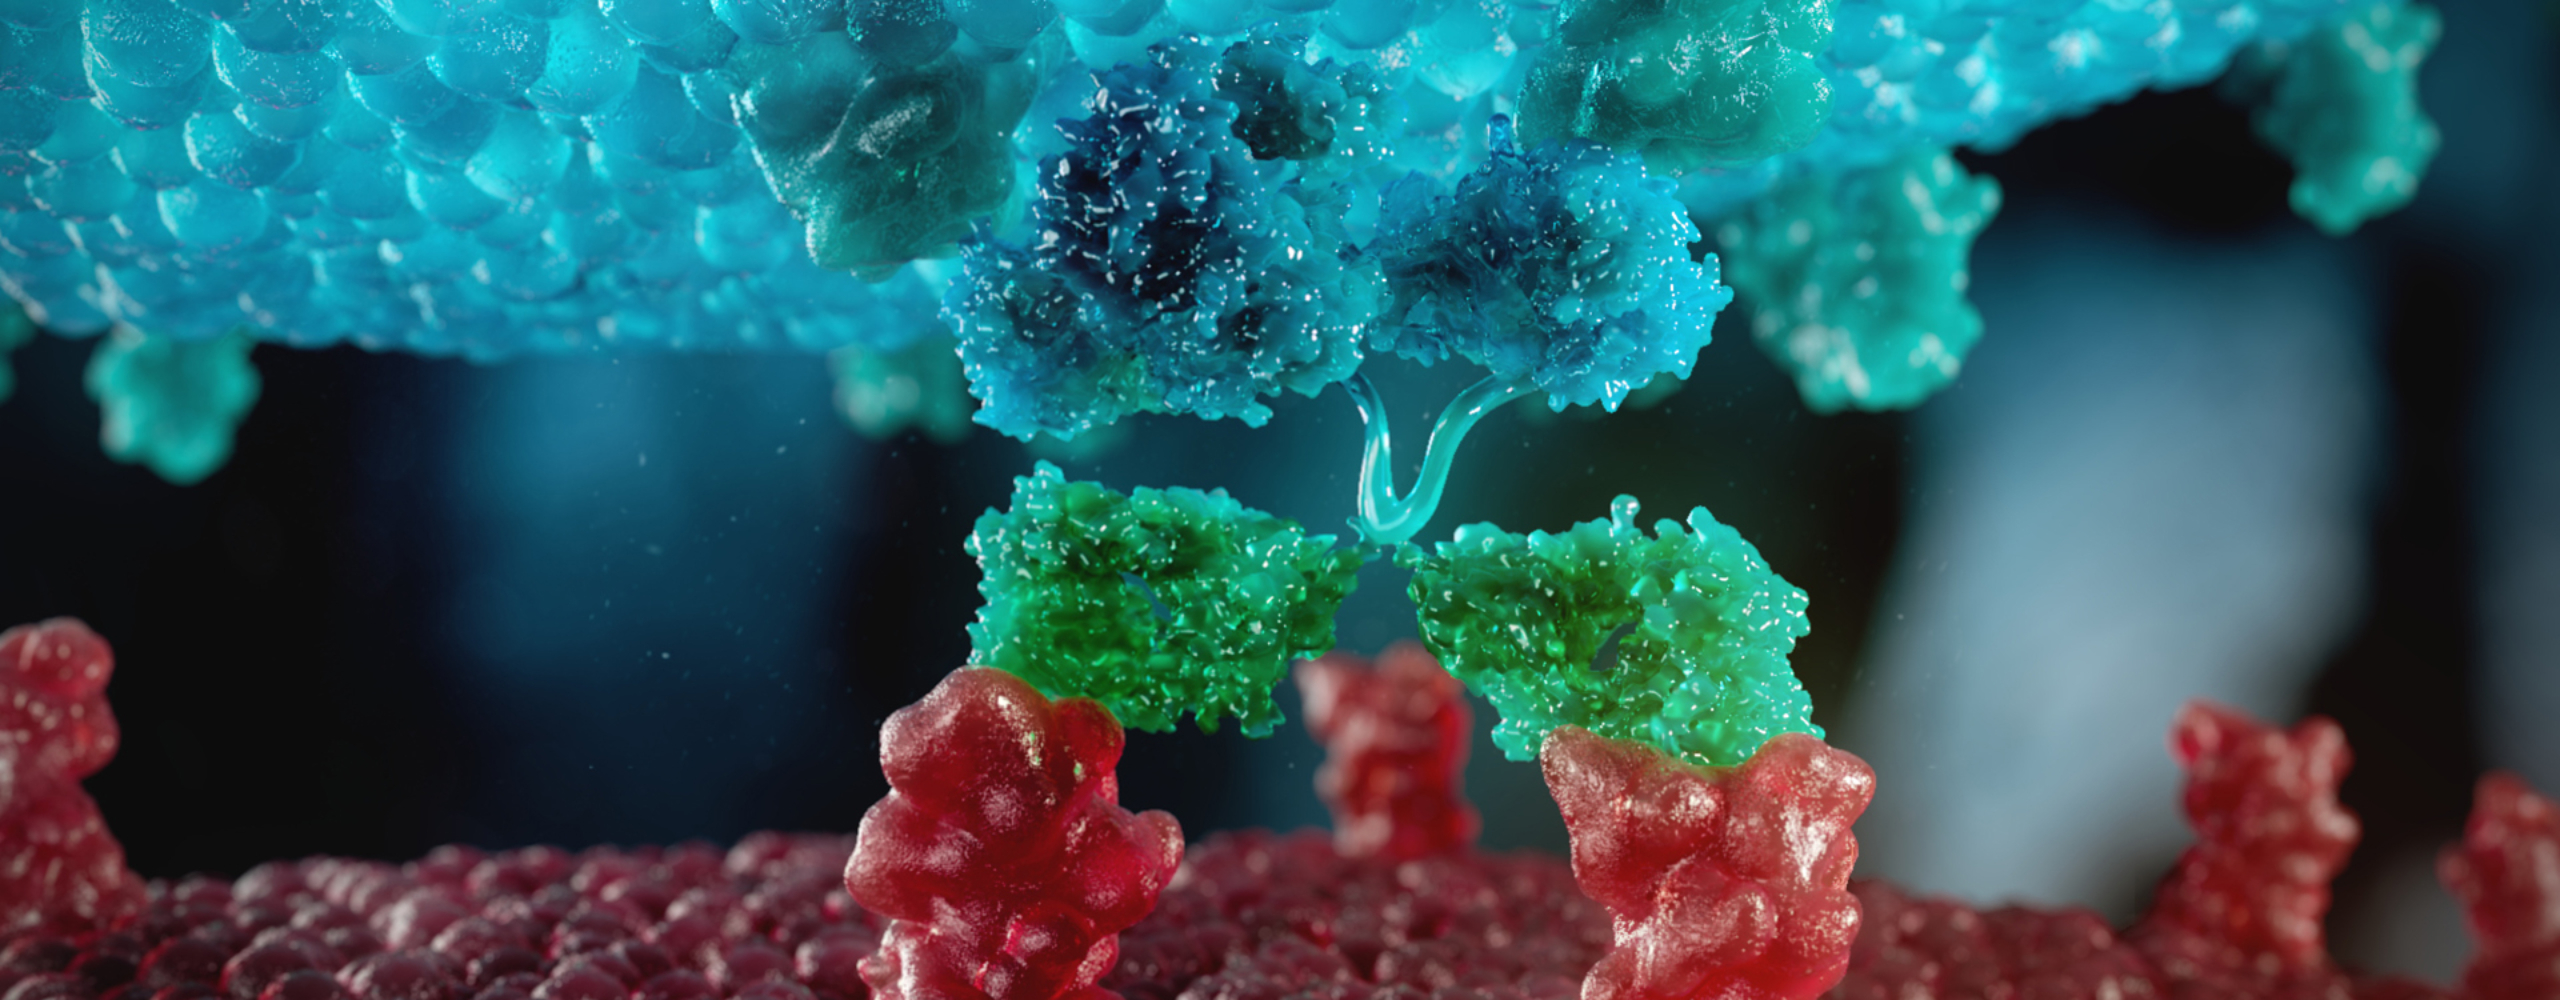 Natural Killer Cell Technology Animation